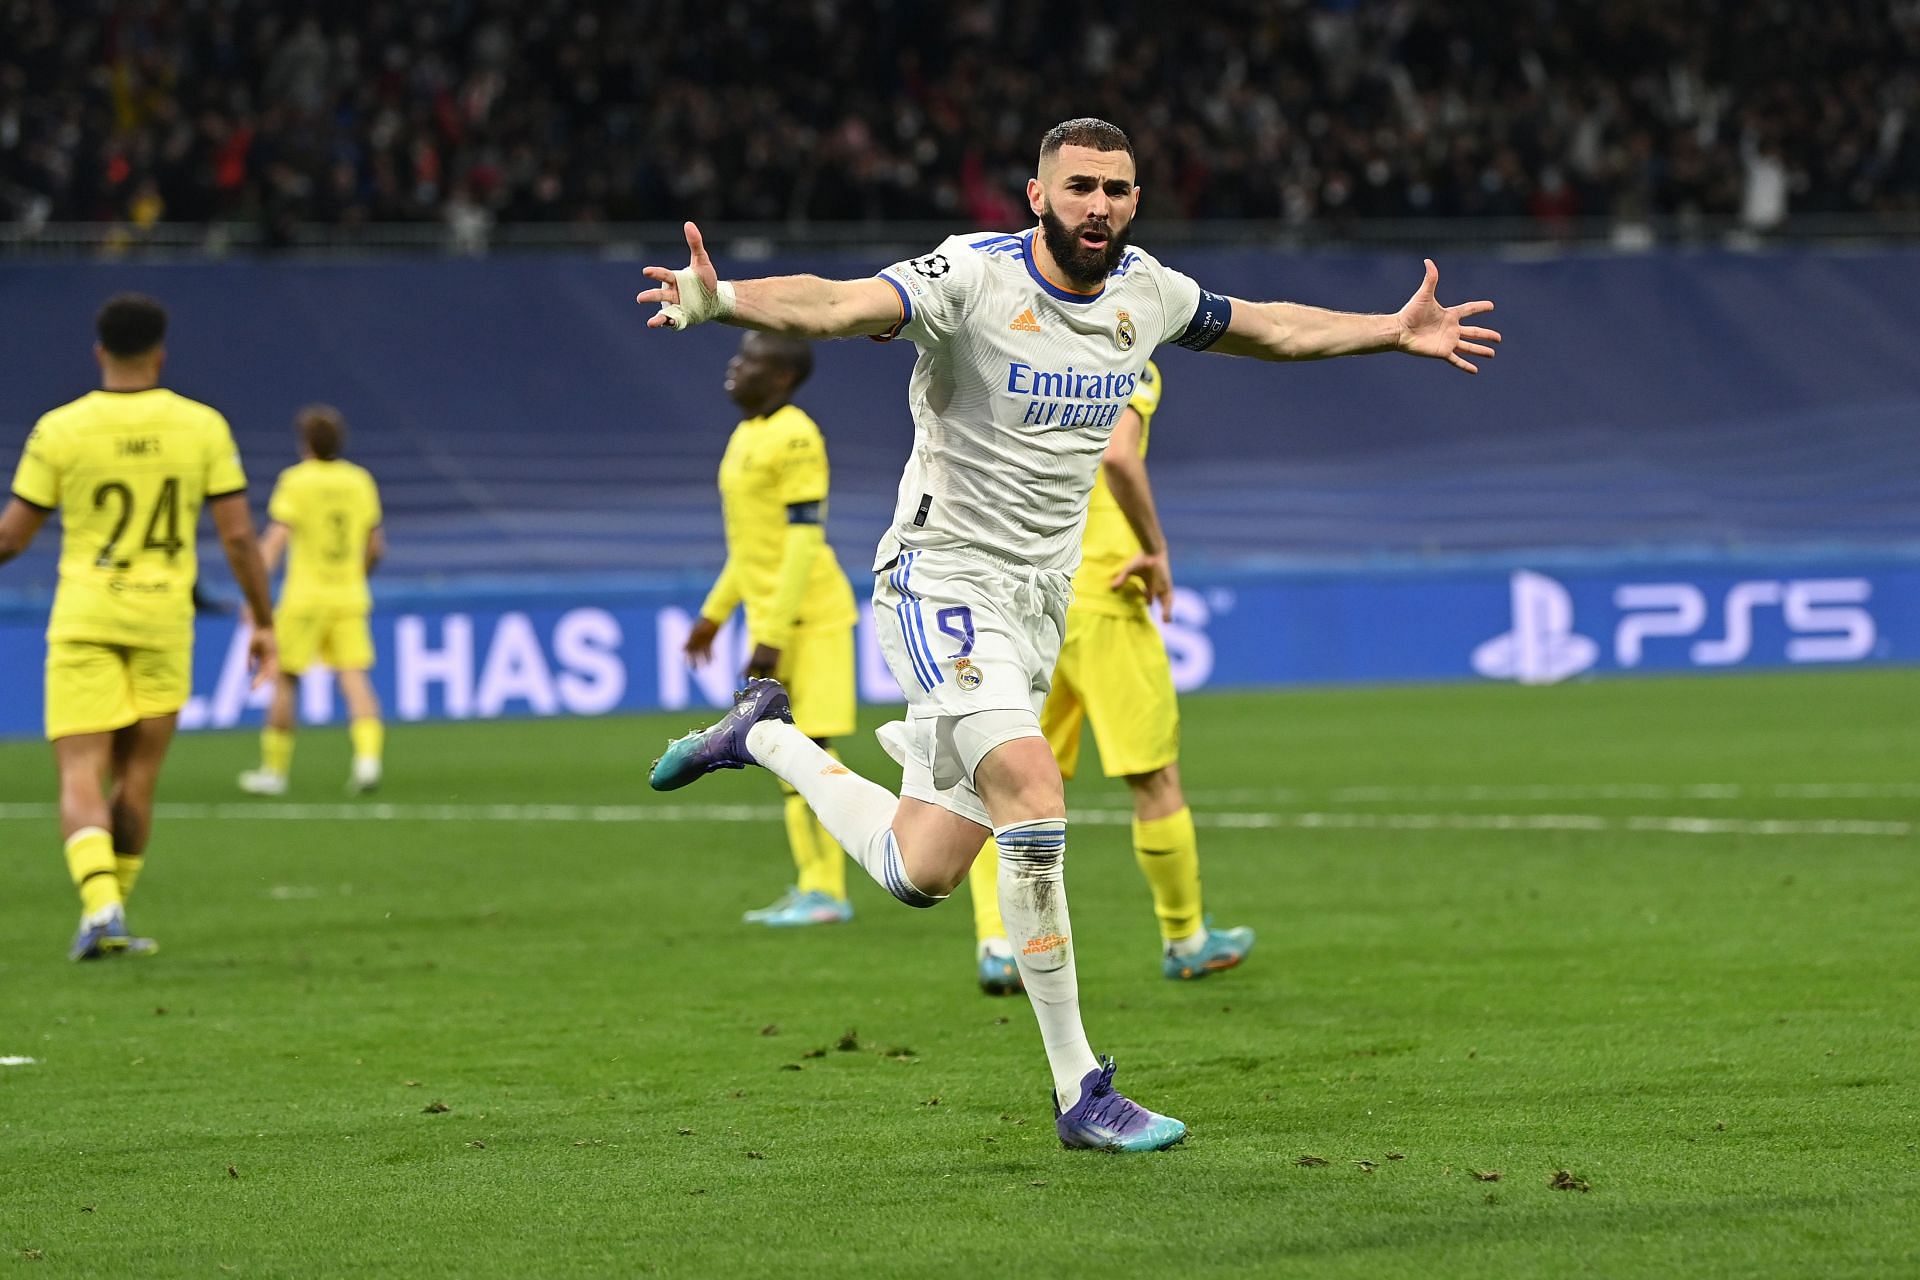 Karim Benzema made the difference yet again